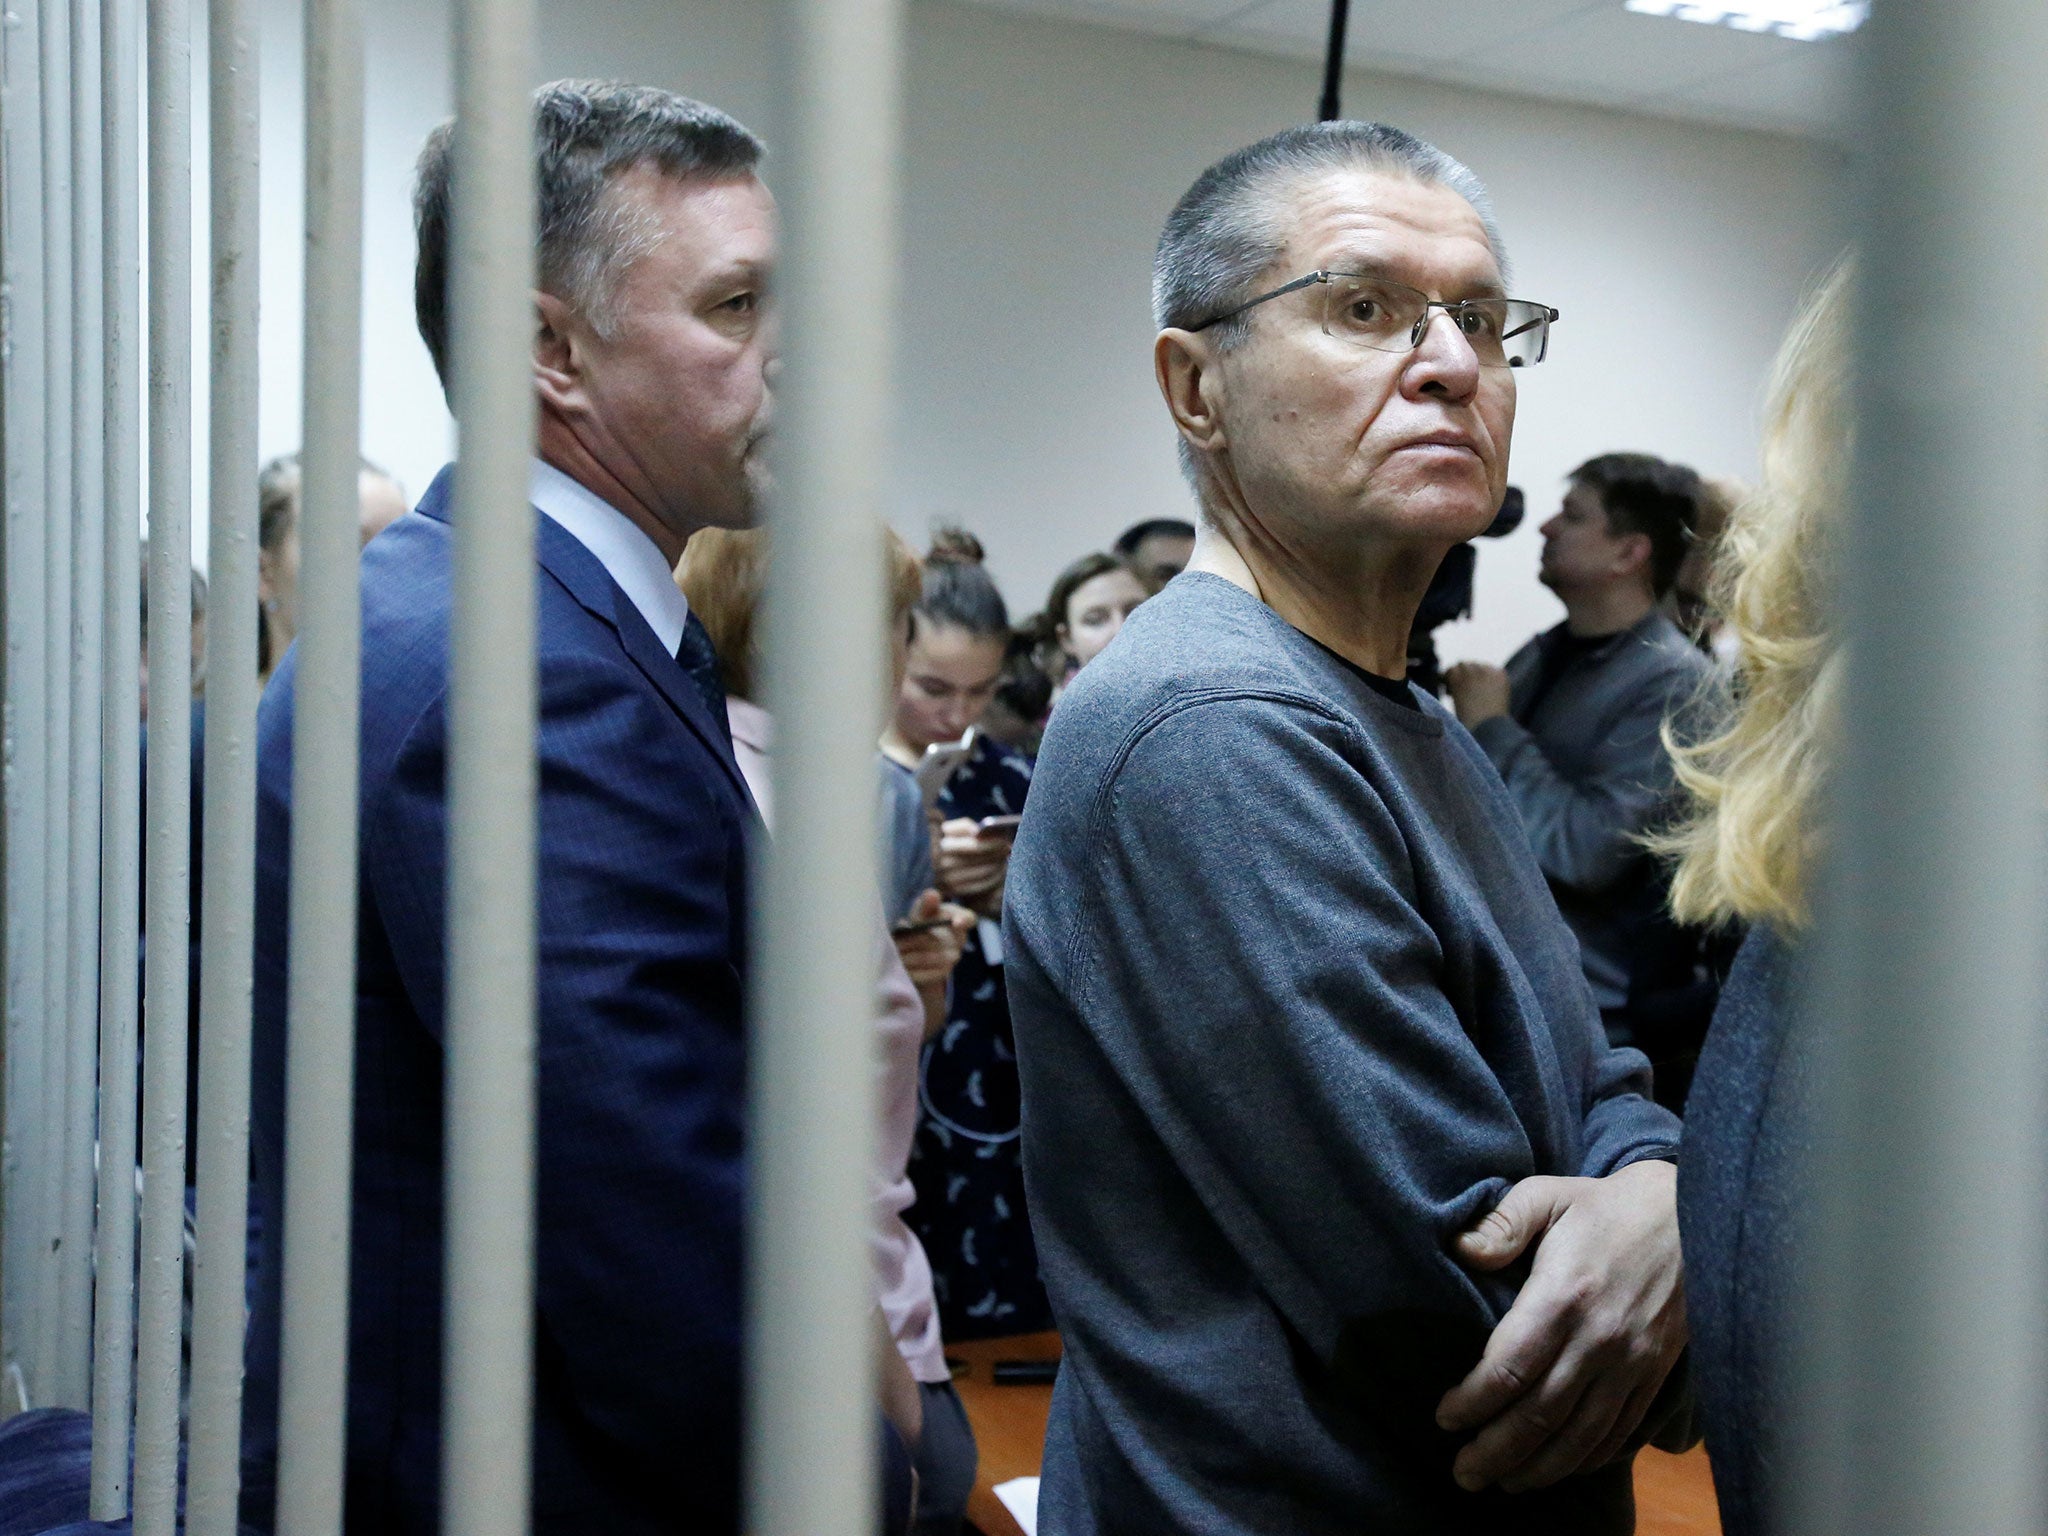 Russia's former economy minister, Alexei Ulyukayev, waits for the start of the court hearing on Friday